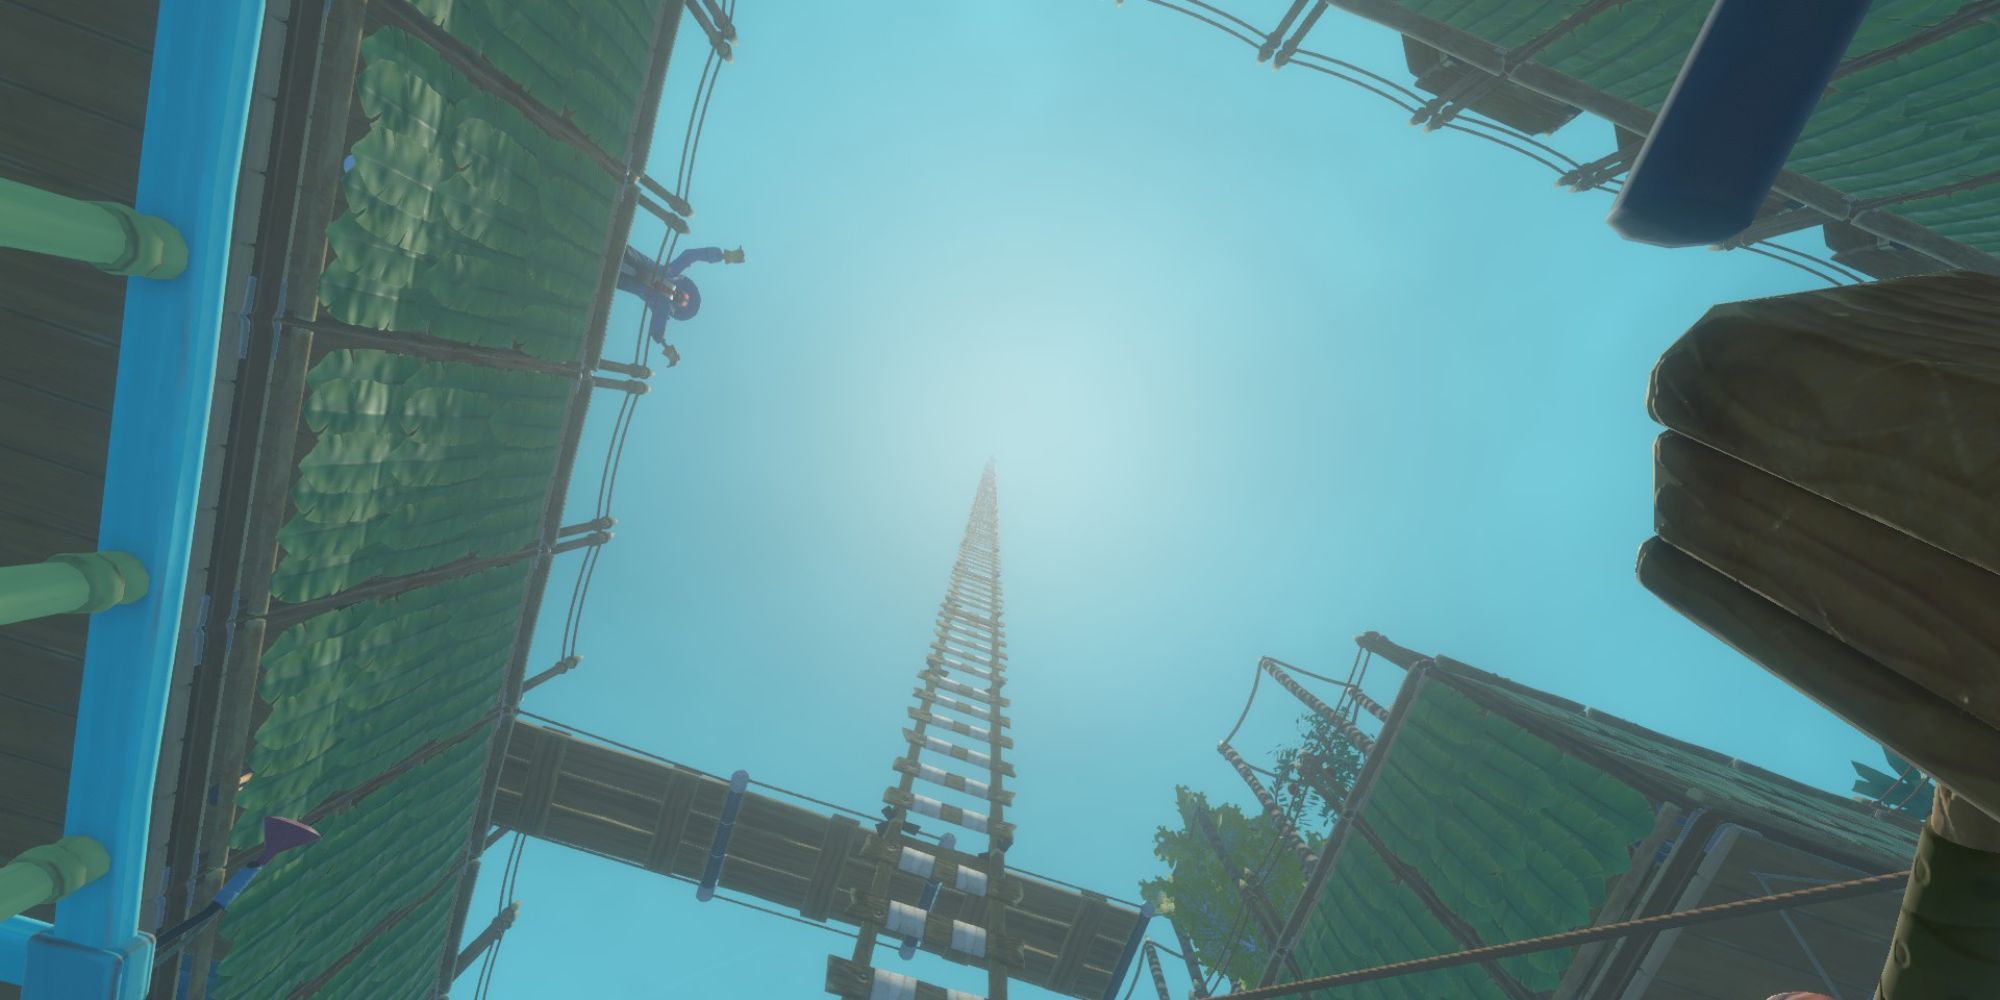 A seemingly endless wooden ladder extends extremely high into the sky